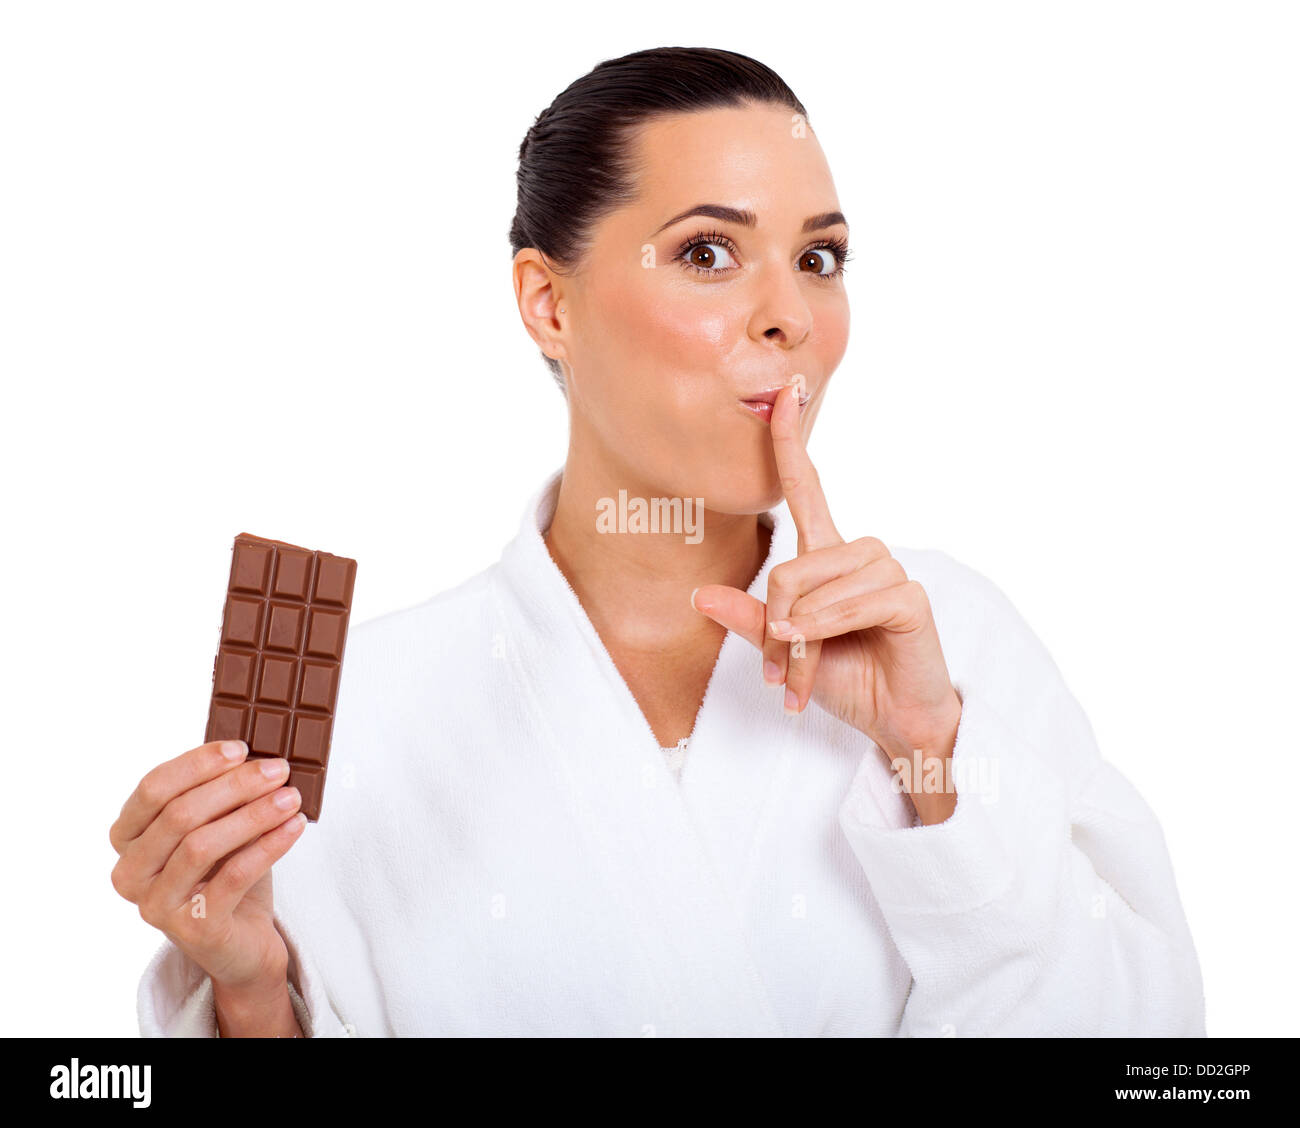 cute woman breaking a diet by eating chocolate and giving shhh sign Stock Photo